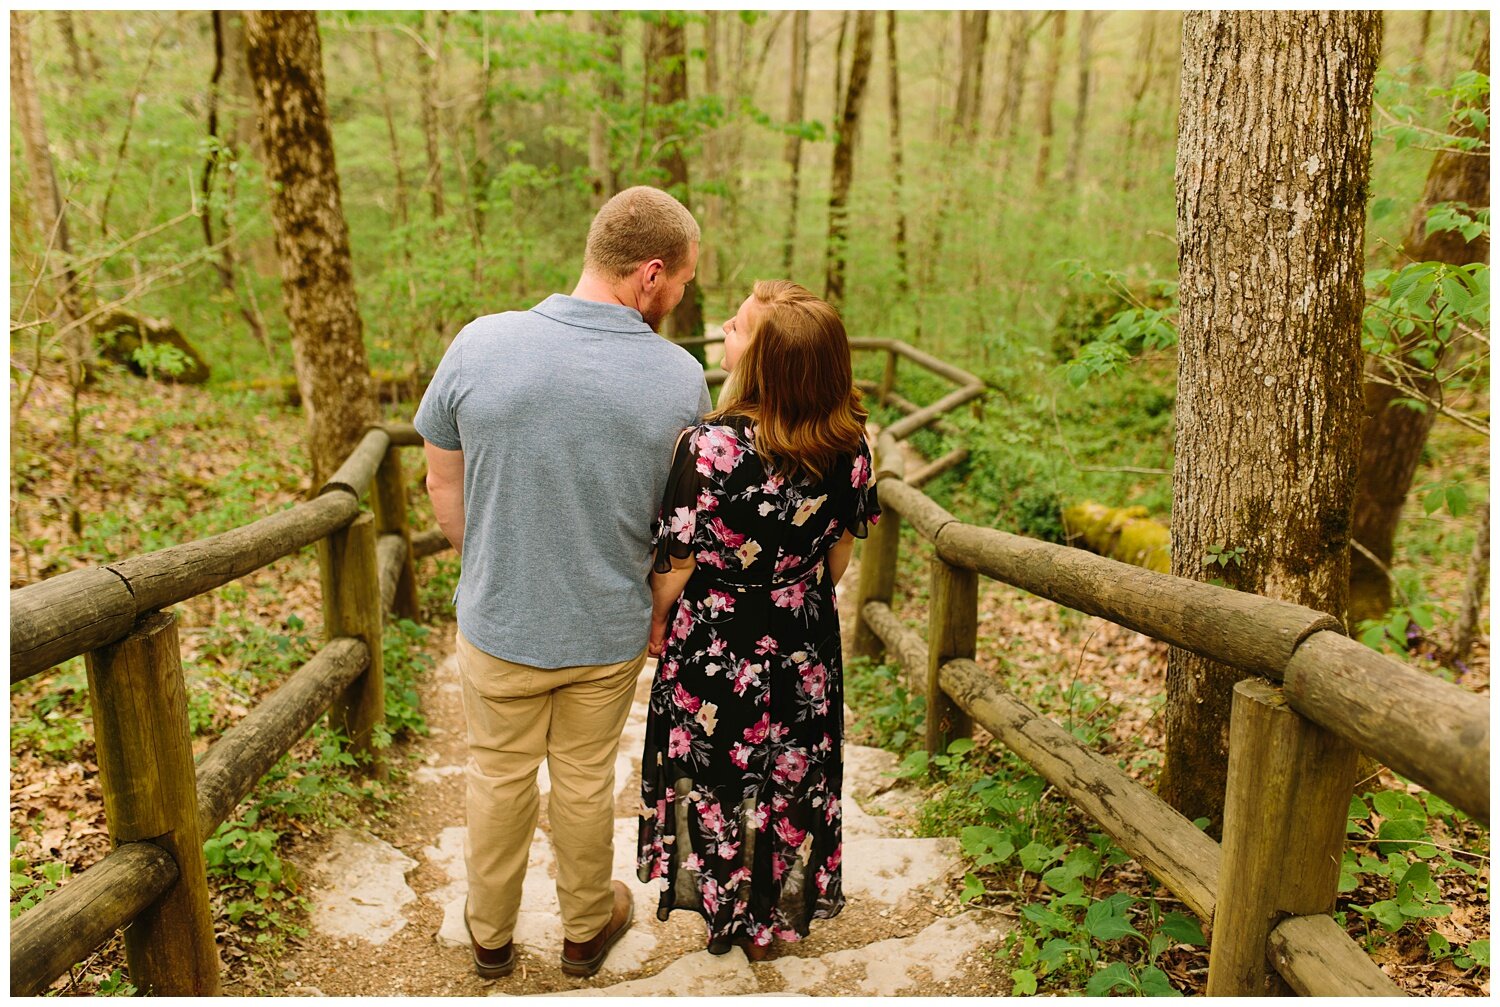 Kendra_Farris_Photography_Red_River_Gorge_Engagement_Photos-8.jpg